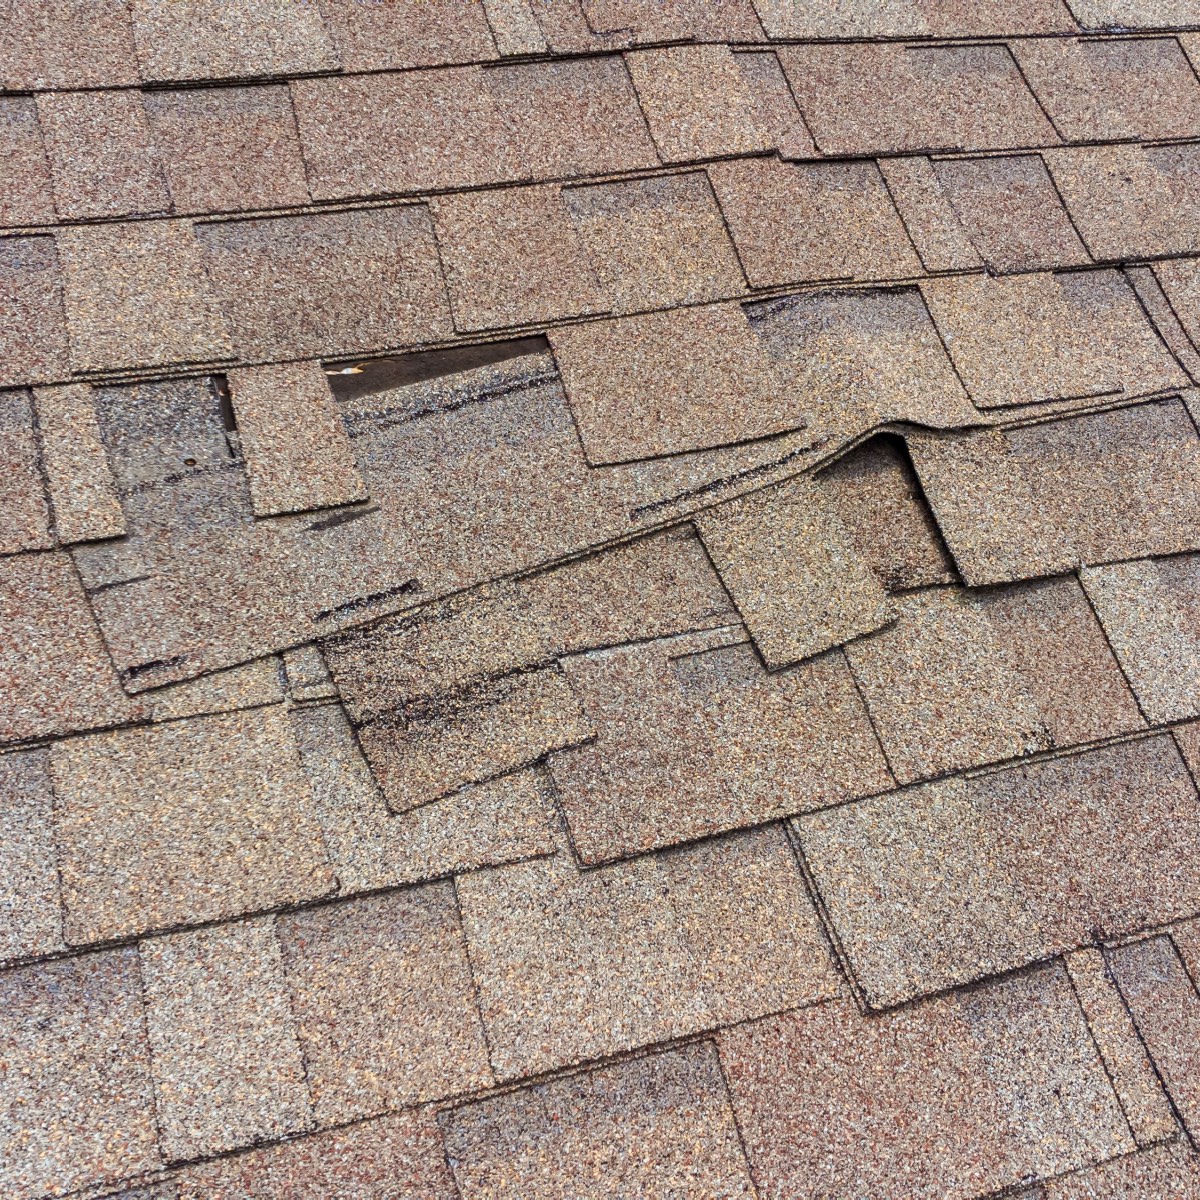 Damaged shingles on a roof